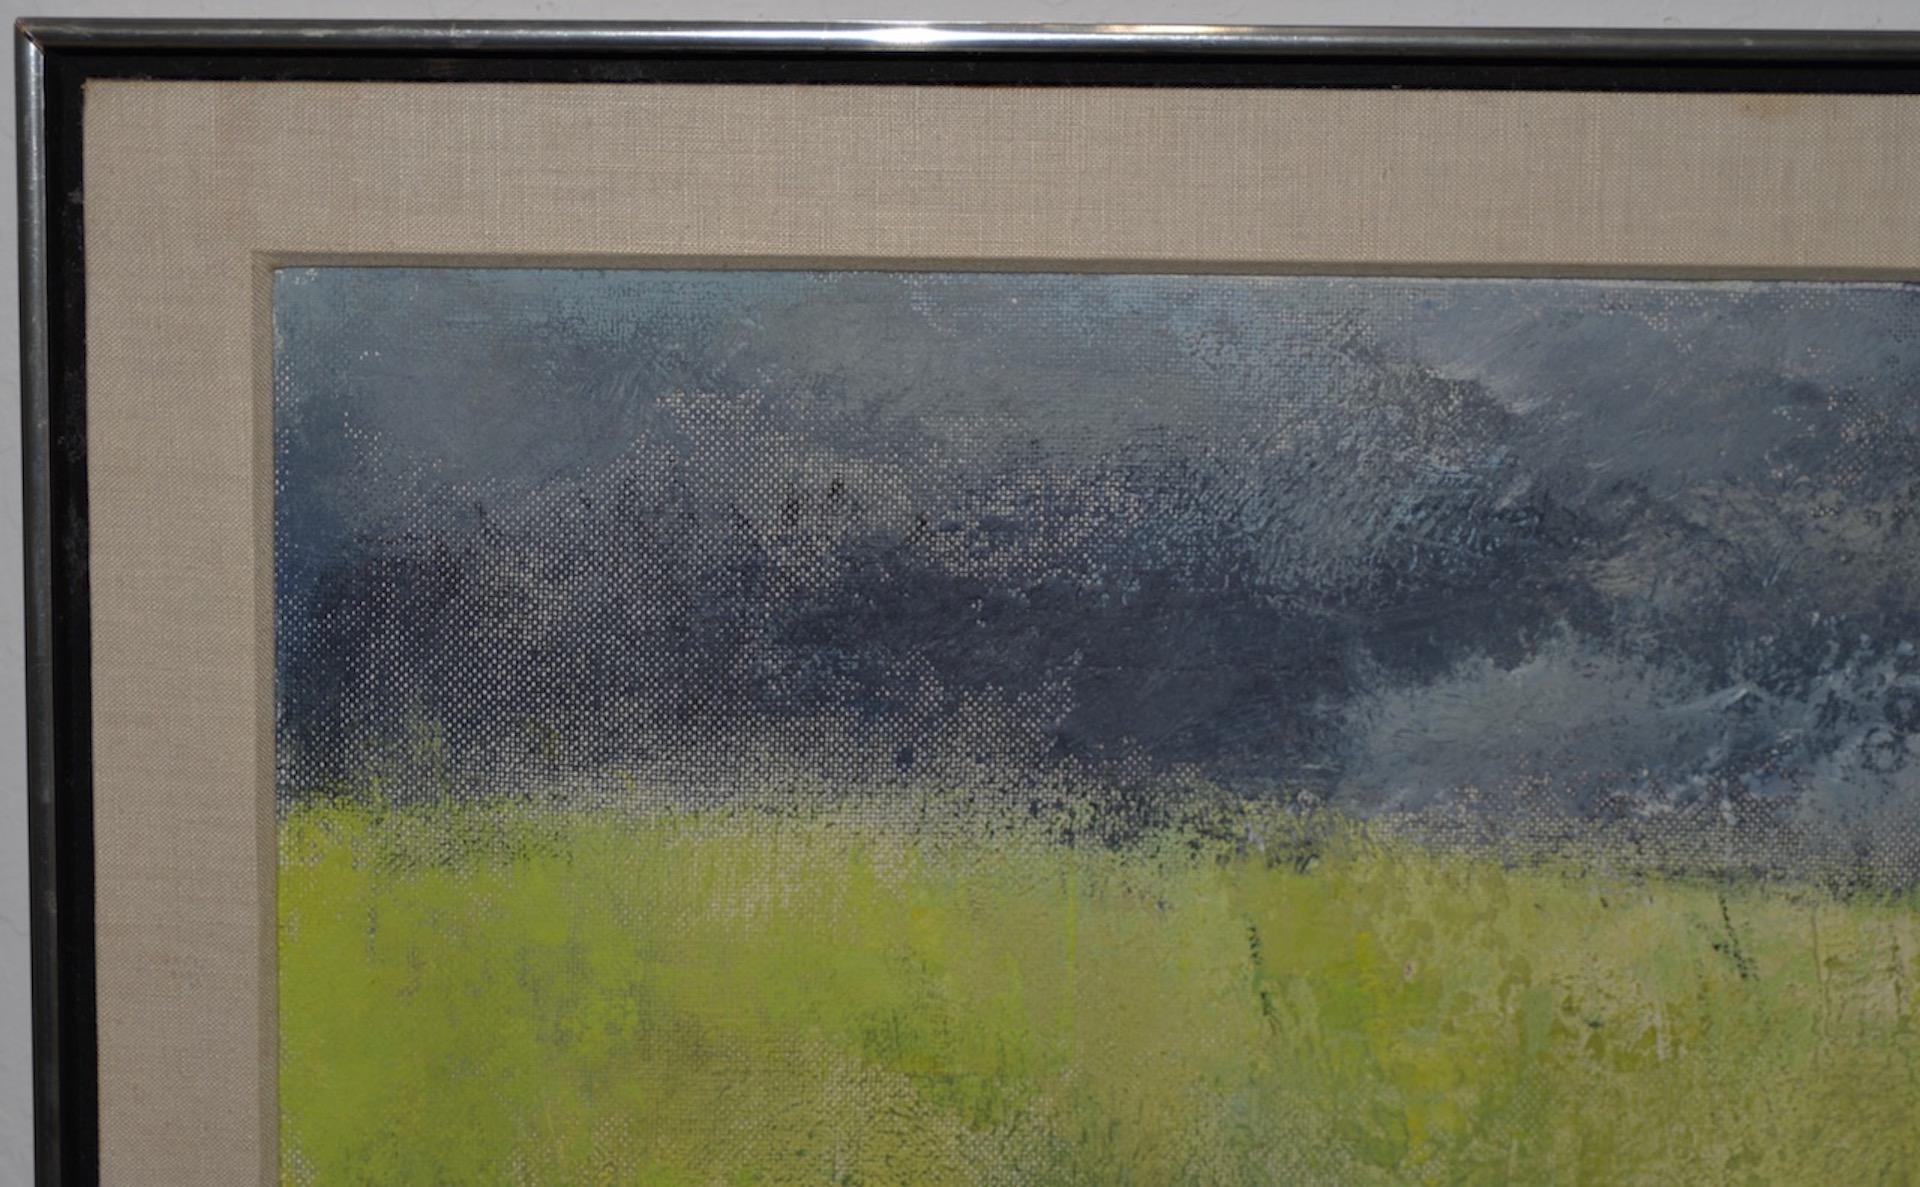 Large scale mid-century modern painting by listed American artist Joseph Barber (1915-1998)

The painting shows the beautiful stark landscape of an open wheat field under gray skies.

Original oil on masonite. Dimensions 24